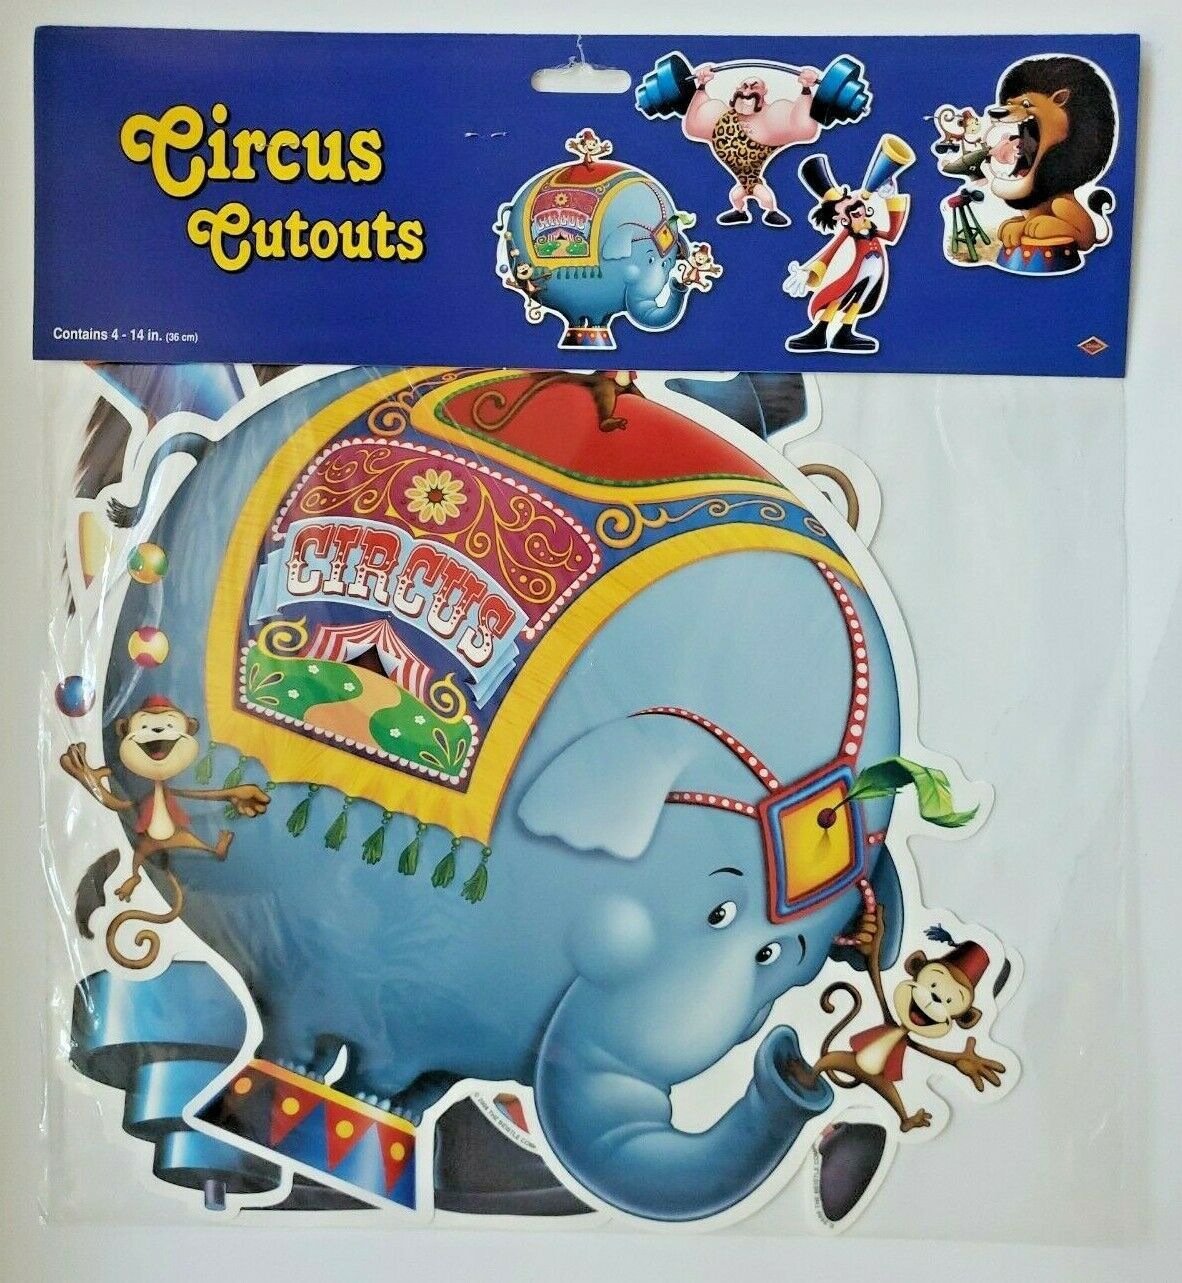 2008 Beistle Circus Cutouts 4-14" Set Of 4 New In Packaging - $16.99